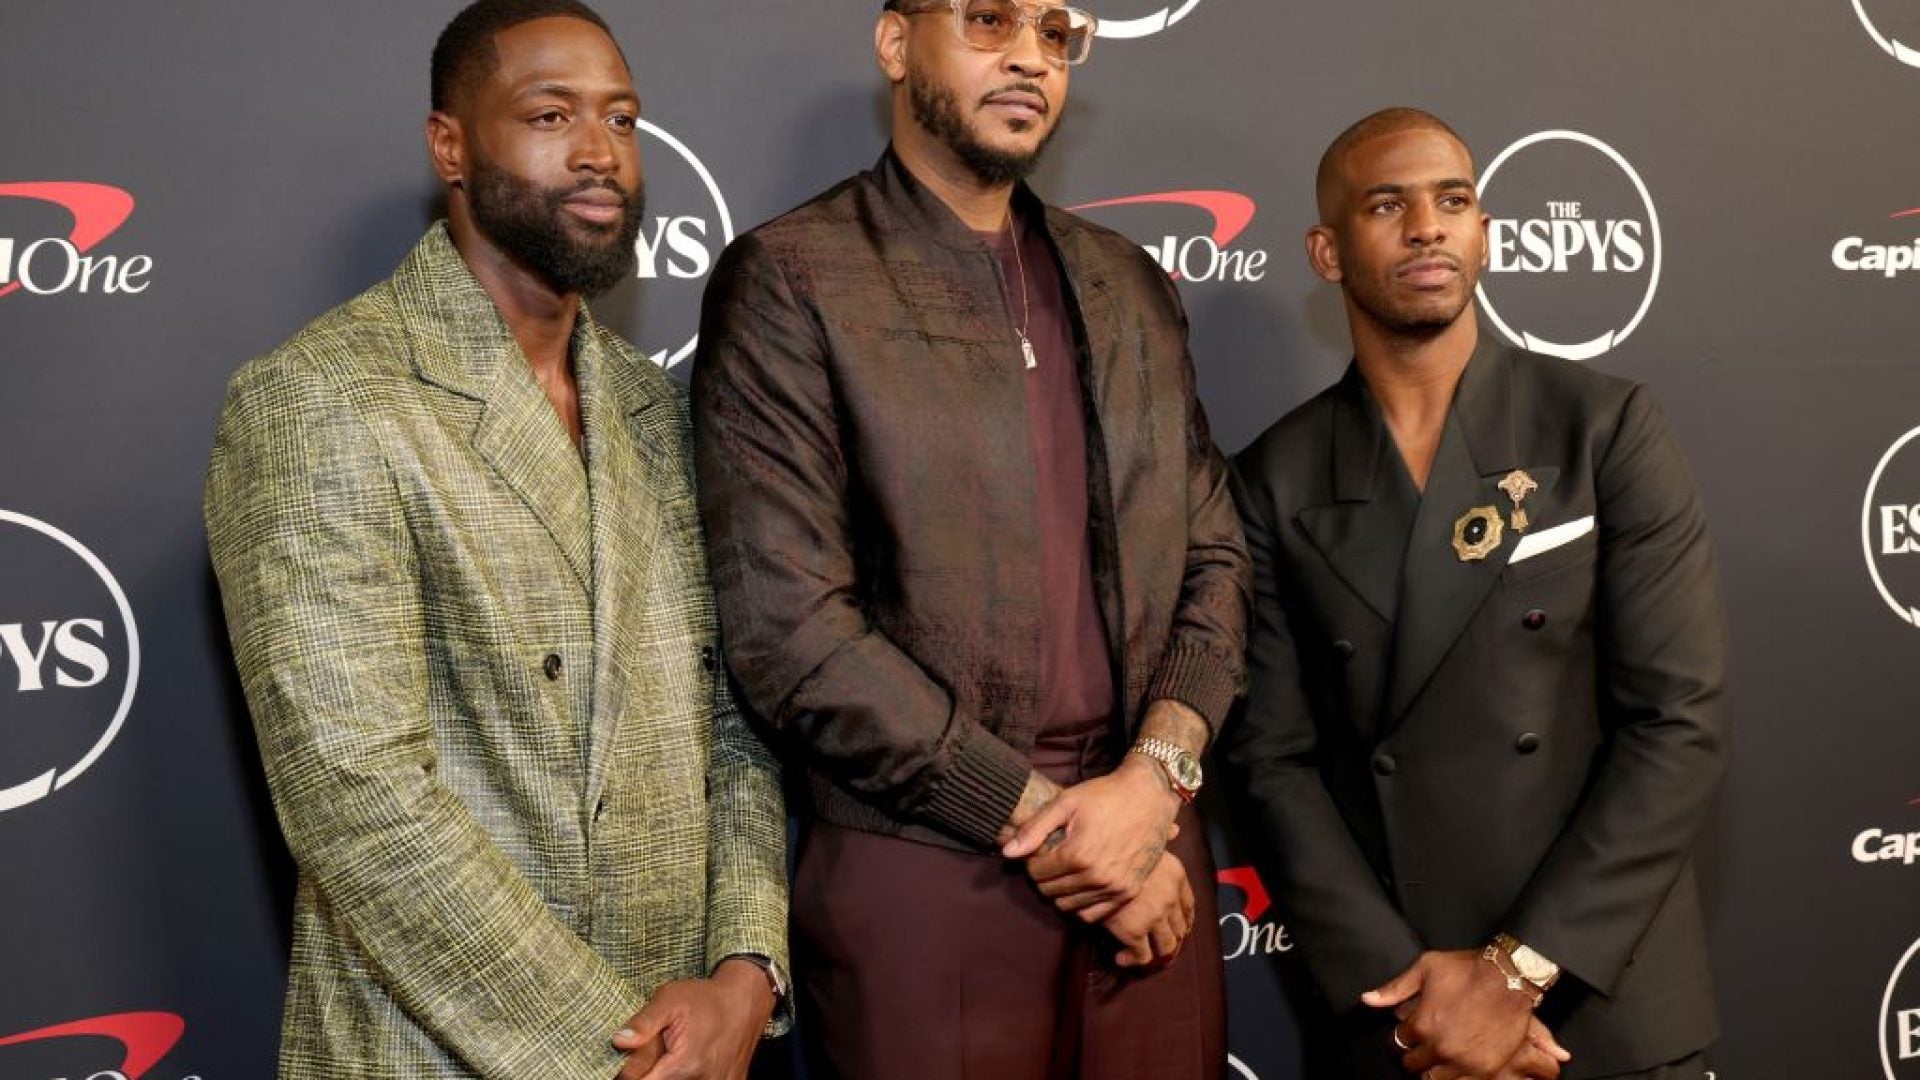 Carmelo Anthony, Chris Paul And Dwyane Wade's Fund Grants $230,000 To Two Black Founders Affecting Social Good